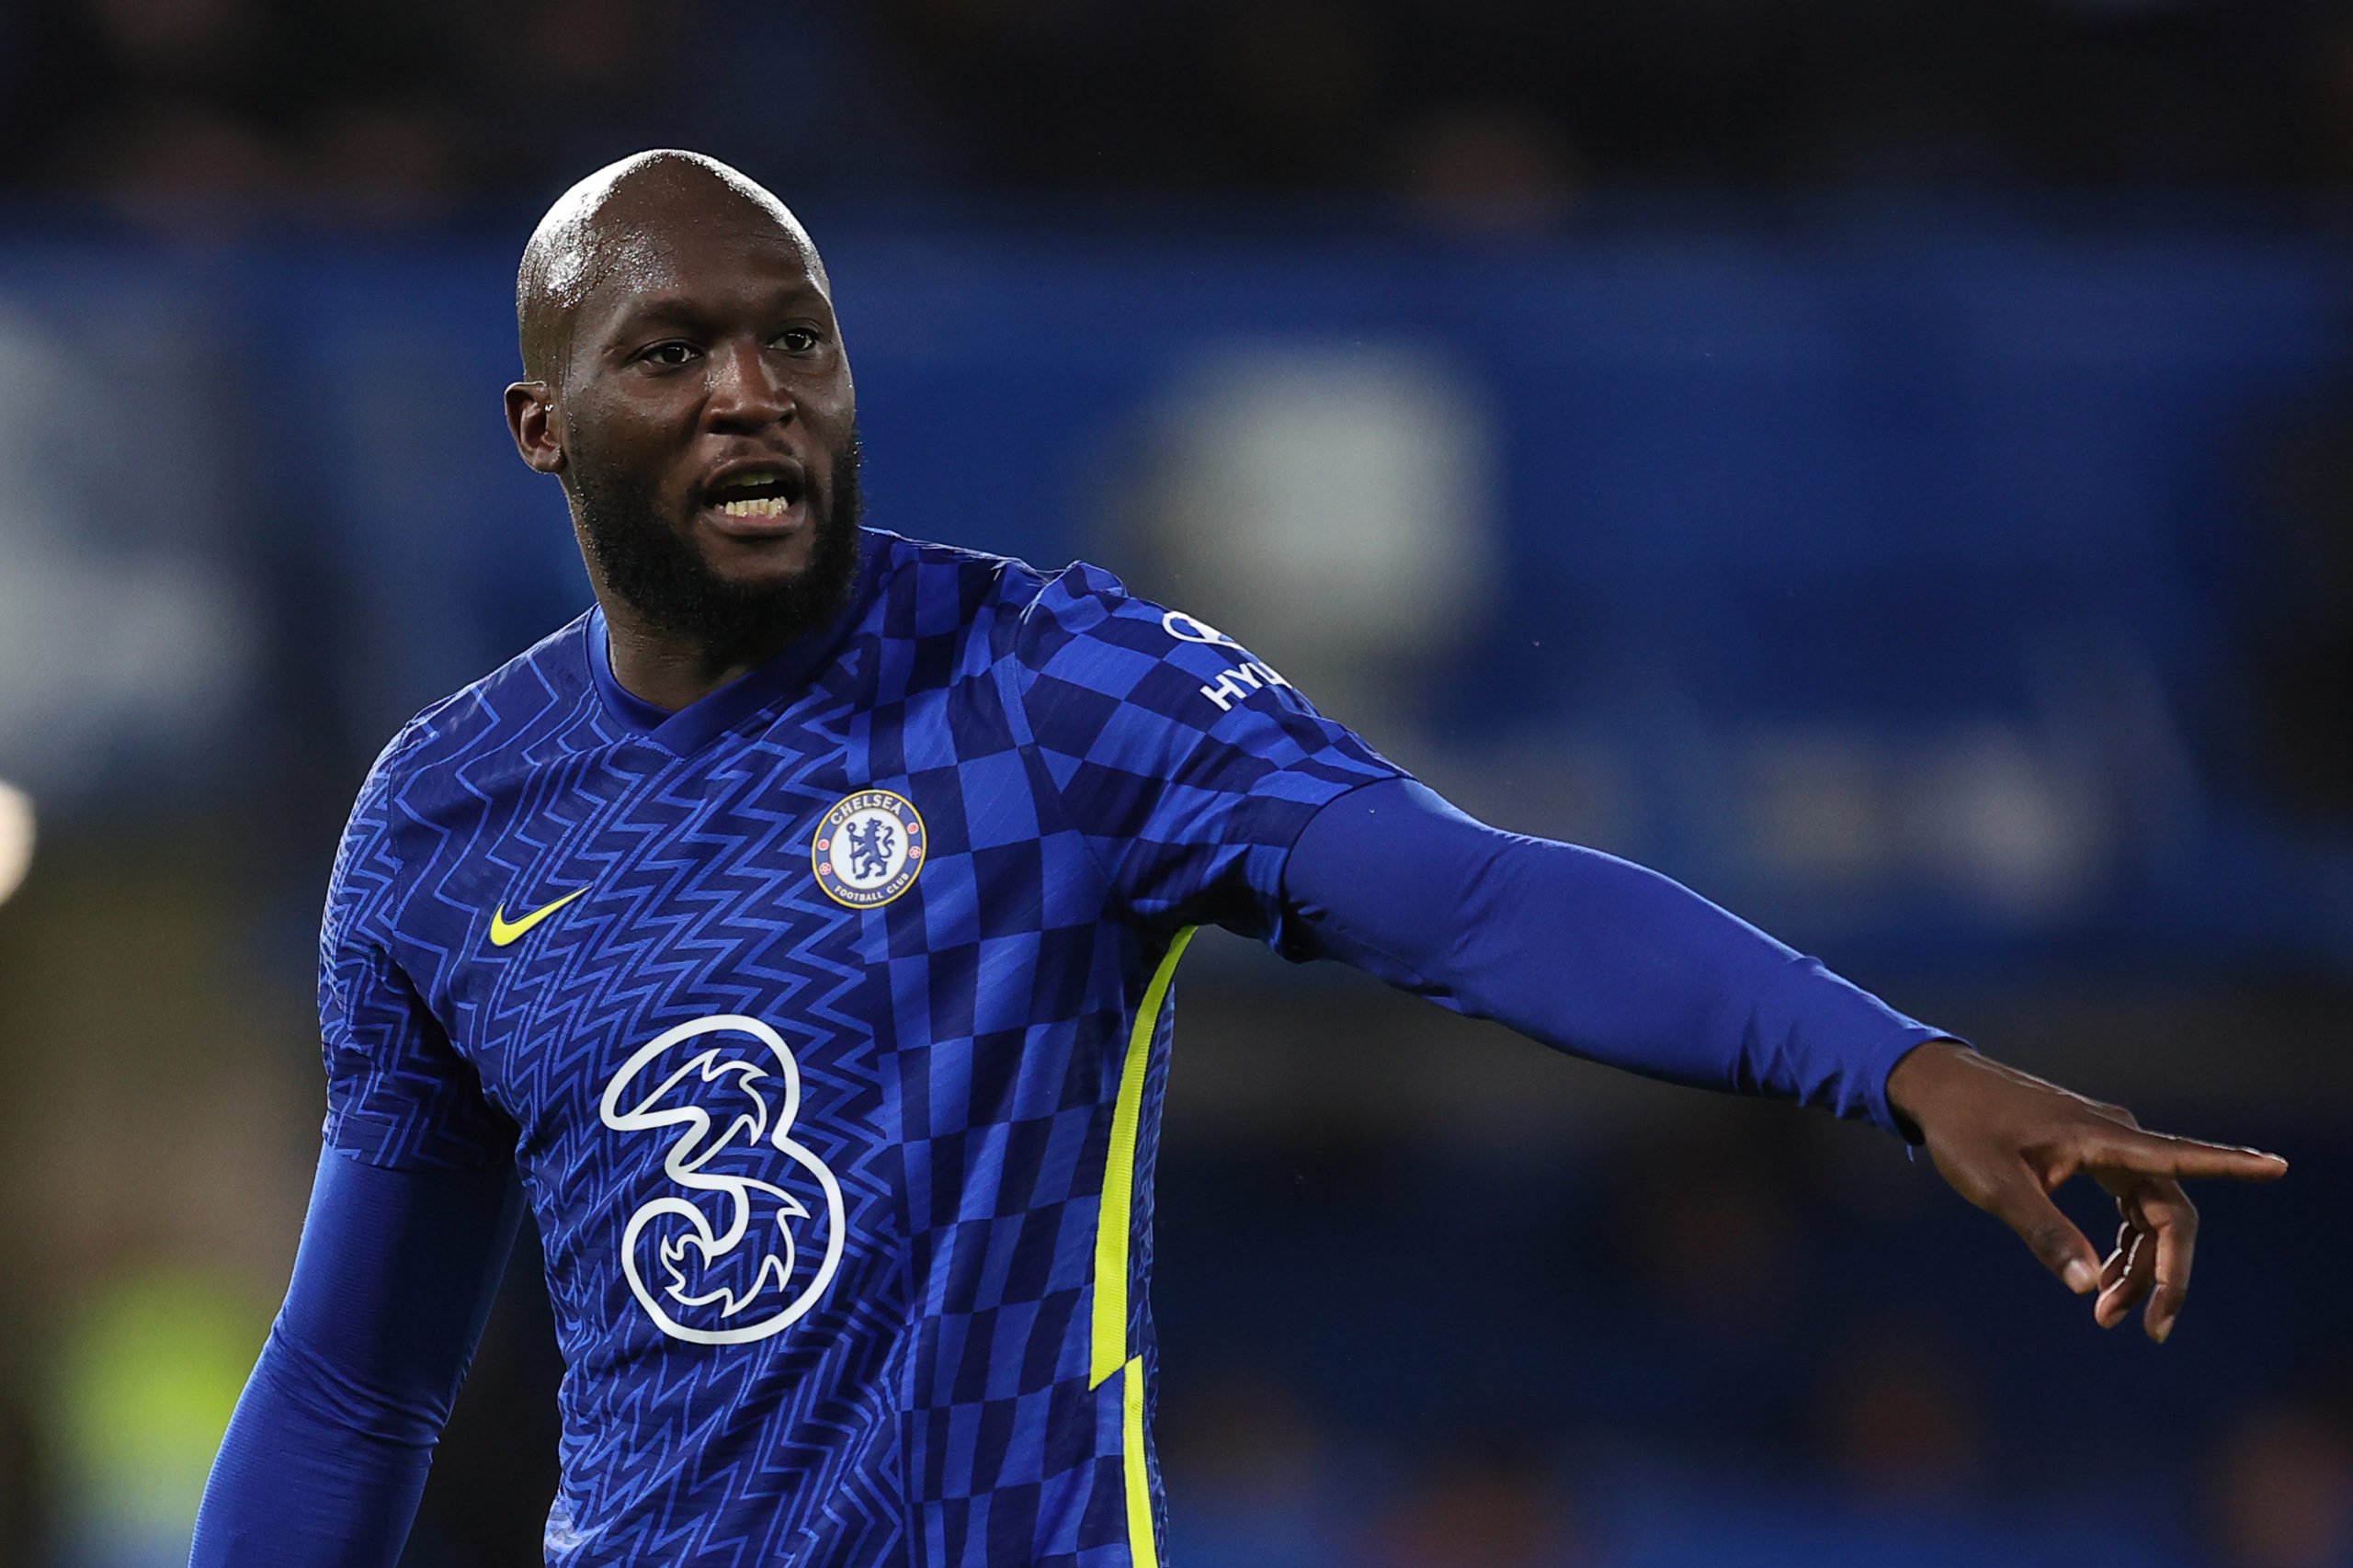 Lukaku's admission in October about his playing style now contradicts what he told Sky Italia - TCC View